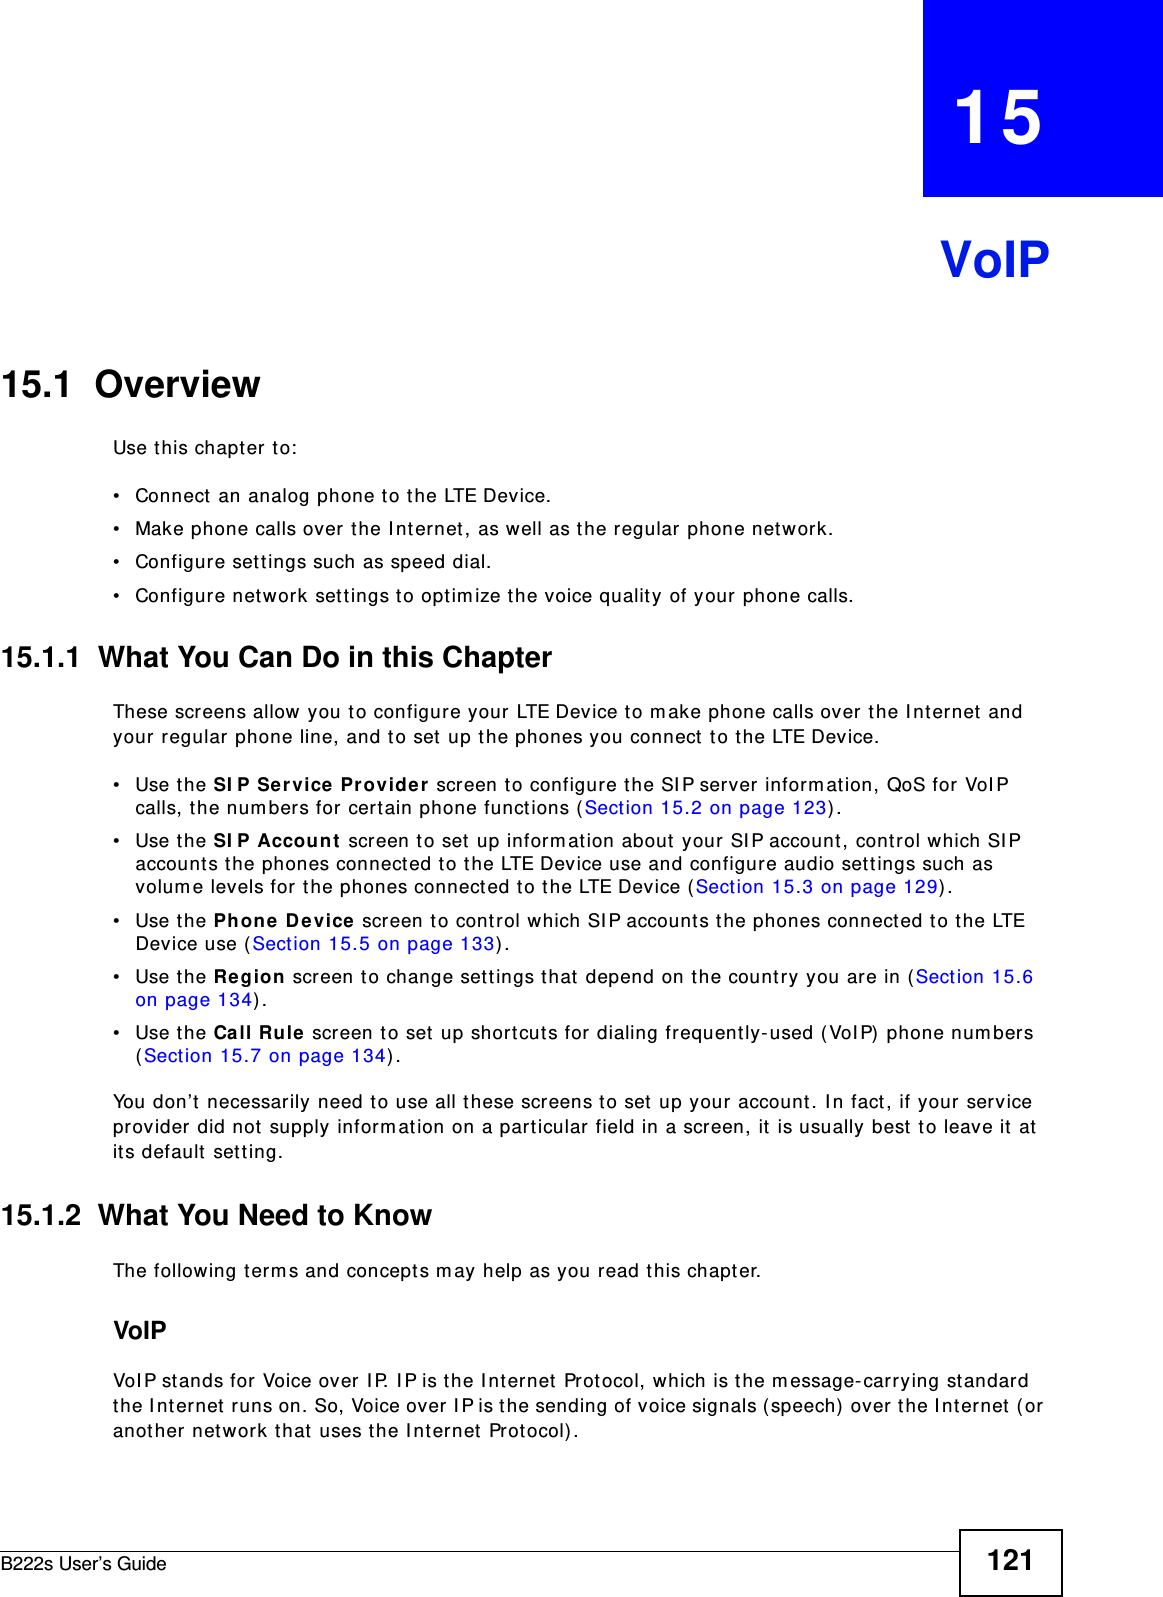 B222s User’s Guide 121CHAPTER   15VoIP15.1  OverviewUse t his chapt er t o:• Connect an analog phone t o t he LTE Device.• Make phone calls over t he I nternet , as well as the regular phone net w ork.• Configure set t ings such as speed dial.• Configure network sett ings t o opt im ize the voice qualit y of your phone calls.15.1.1  What You Can Do in this ChapterThese screens allow you t o configure your LTE Device t o m ake phone calls over t he I nt ernet and your regular phone line, and t o set  up t he phones you connect  t o t he LTE Device.• Use the SI P Se r vice Provide r  screen t o configure t he SI P server infor m ation, QoS for VoI P calls, t he num bers for cert ain phone funct ions ( Sect ion 15.2 on page 123) . • Use the SI P Accou nt  screen t o set  up inform ation about your SI P account, control which SI P account s t he phones connect ed to t he LTE Device use and configur e audio set tings such as volum e levels for  t he phones connected t o t he LTE Device ( Sect ion 15.3 on page 129) .• Use the Ph one De vice screen t o cont rol which SI P account s t he phones connect ed t o t he LTE Device use ( Sect ion 15.5 on page 133) .• Use the Re gion screen t o change set t ings t hat  depend on t he country you are in ( Sect ion 15.6 on page 134) .• Use the Call Ru le screen t o set up short cuts for dialing frequently- used ( VoI P)  phone num bers (Section 15.7 on page 134) .You don’t necessarily need t o use all t hese scr eens t o set up your account . I n fact , if your service provider did not supply inform ation on a part icular field in a screen, it  is usually best to leave it at it s default  sett ing.15.1.2  What You Need to KnowThe following term s and concept s m ay help as you read this chapt er.VoIPVoI P stands for Voice over I P. I P is t he I nternet  Prot ocol, which is t he m essage- carrying standard the I nt er net  runs on. So, Voice over I P is t he sending of voice signals ( speech)  over the I nt ernet  ( or anot her net work that  uses t he I nternet  Prot ocol) .